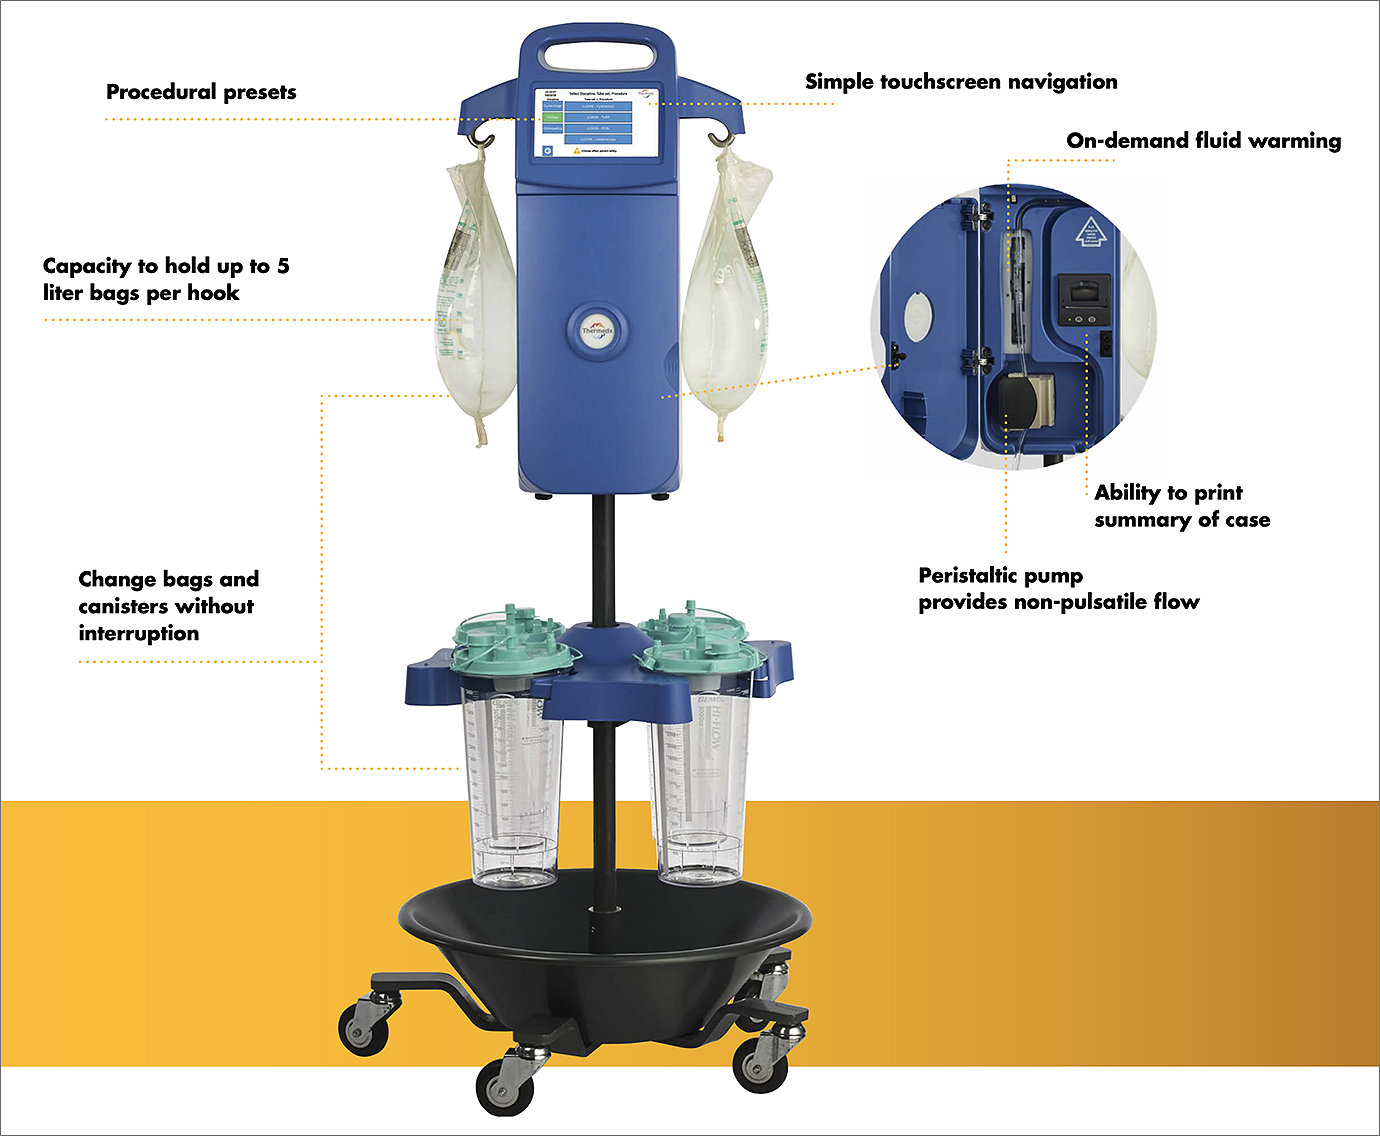 Thermedx FluidSmart - Features - Procedural presets | Simple touchscreen navigation | Capacity to hold up to 5 liter bags per hook | Change bags and canisters without interruption | On demand fluid warming | Ability to print sumary of case | Peristaltic pump provides non pulsatile flow